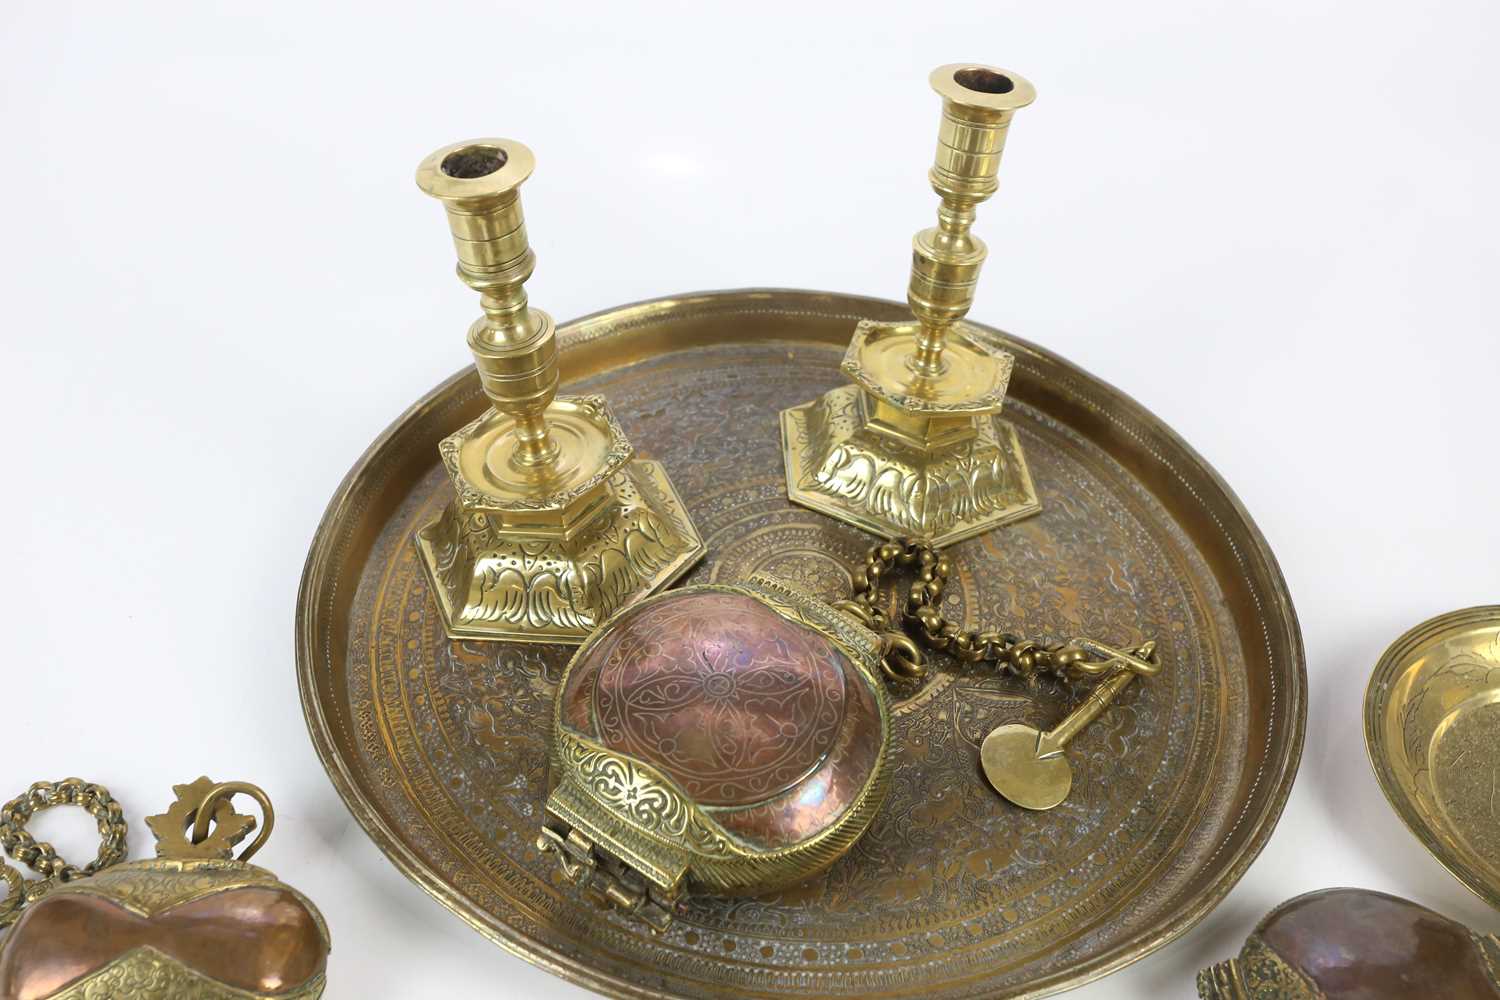 A collection of assorted Eastern metalware including brass tray, copper amd brass warming bowls, - Image 2 of 4